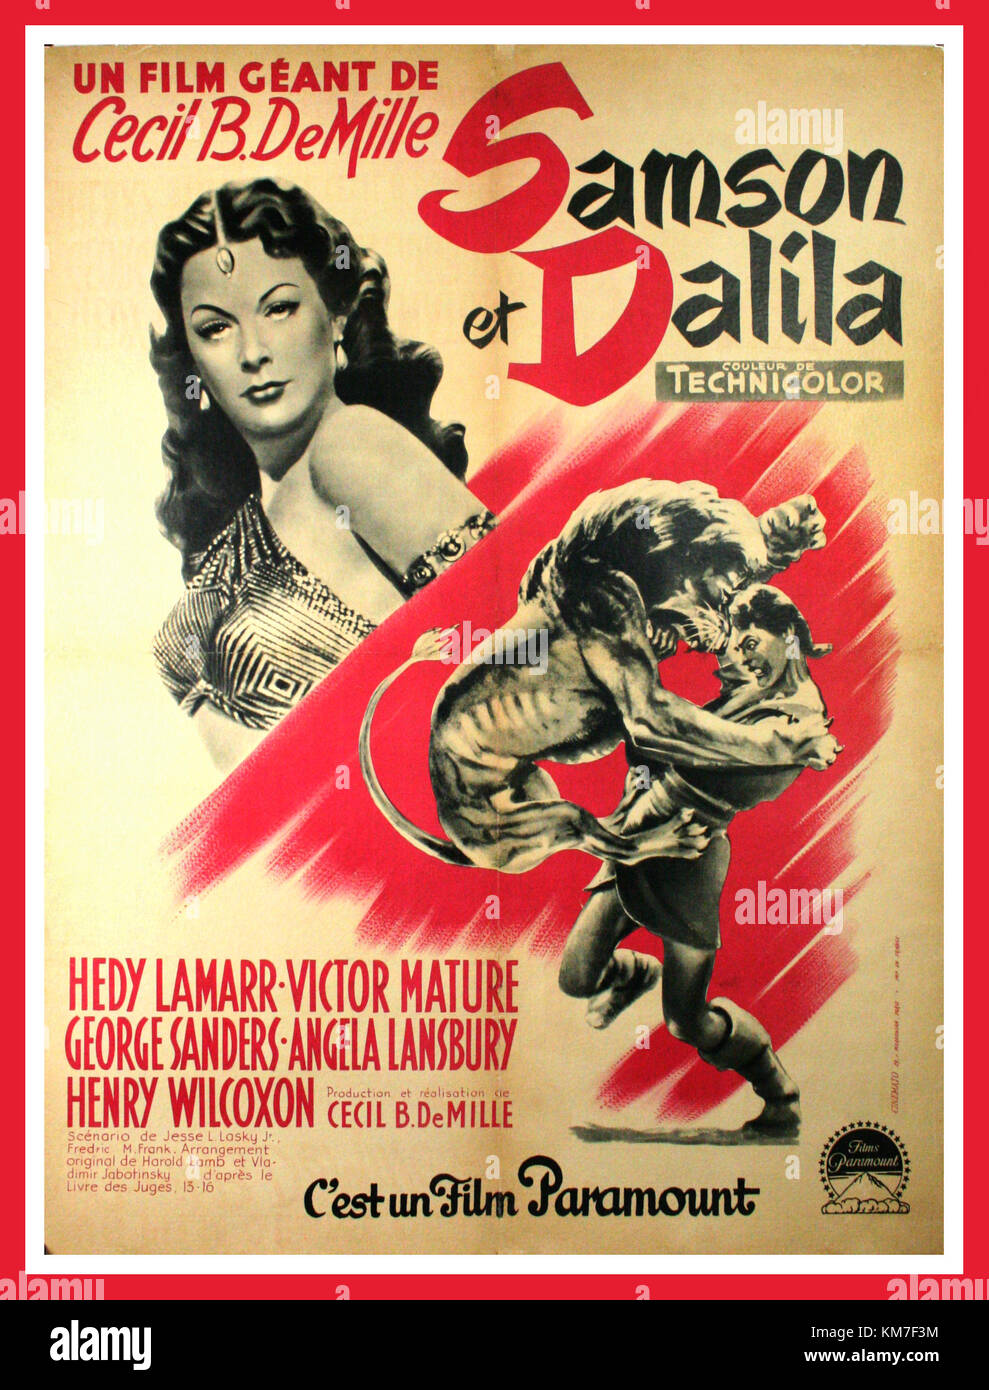 Vintage 1940's movie film poster SAMSON & DALILA 1949, Samson et Dalila (Samson and Delilah)  French movie poster starring Hedy Lamarr, Victor Mature and directed by Cecil B. DeMille. Poster for French audiences depicting Hedi Lamarr in a ruthless pose for this renowned biblical story. Stock Photo